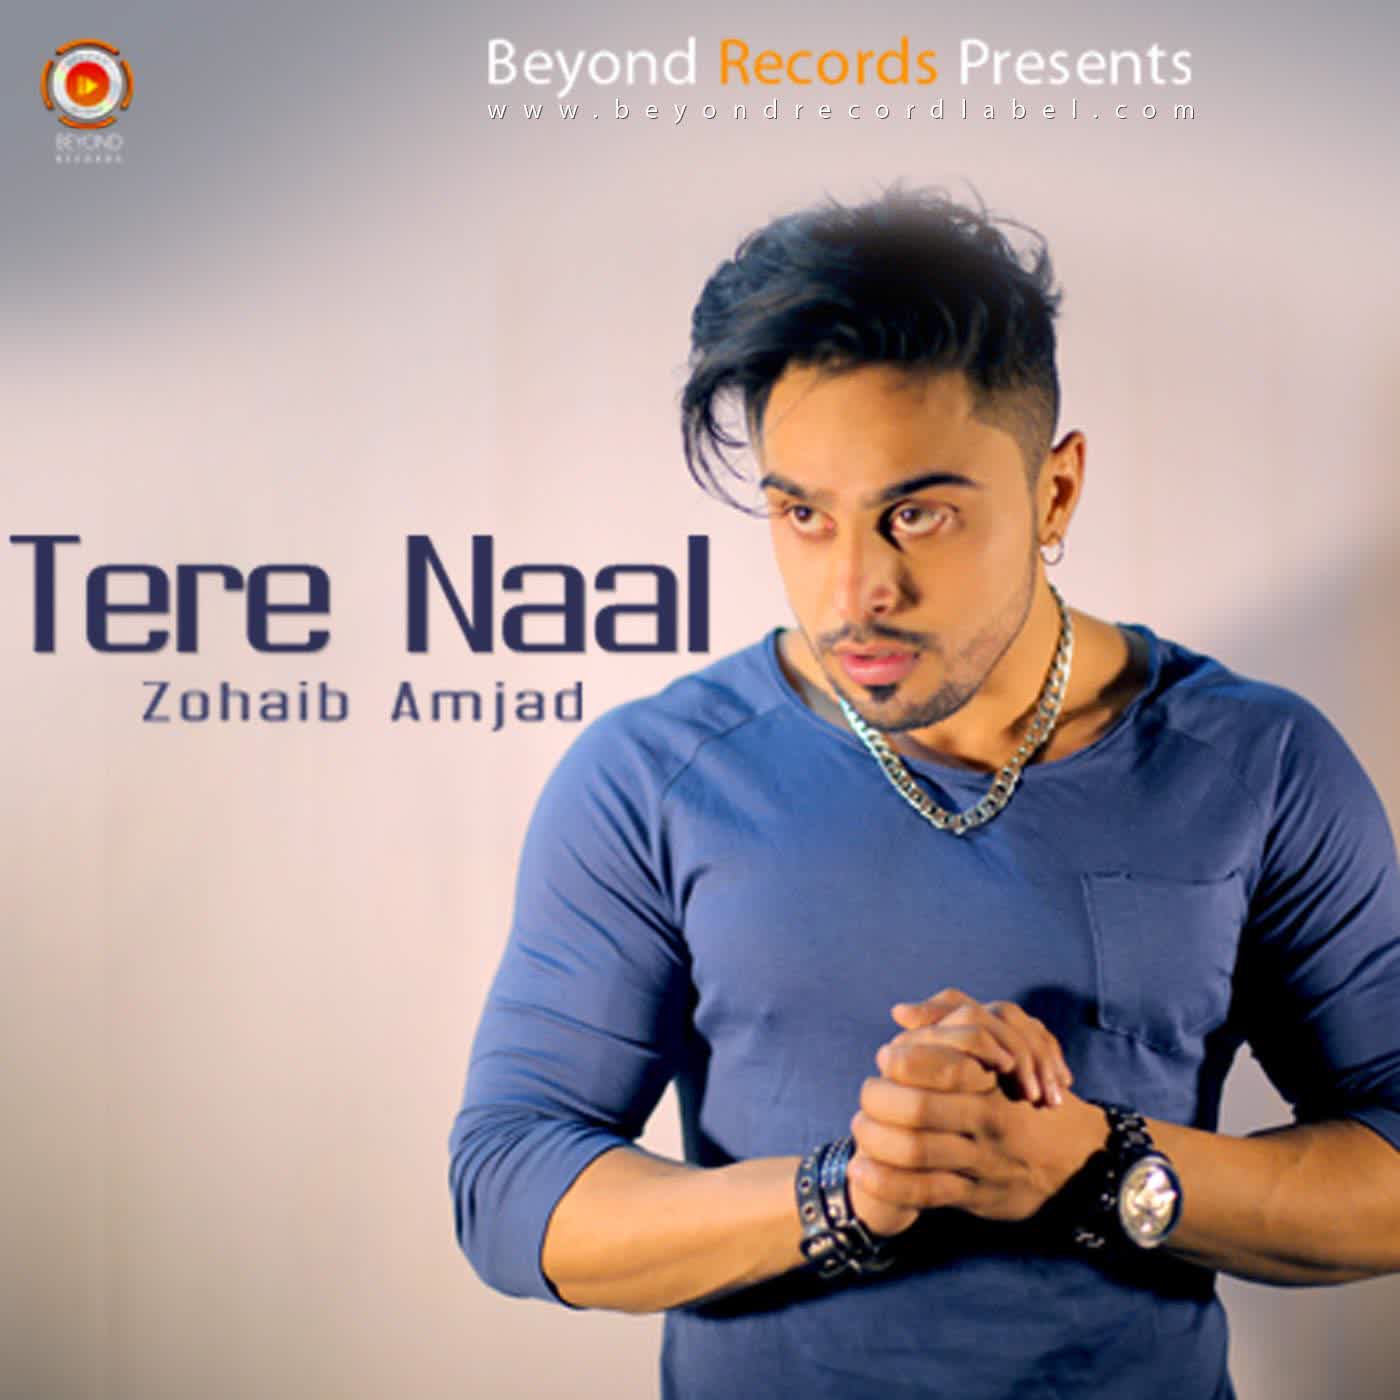 Tere Naal Zohaib Amjad  Mp3 song download